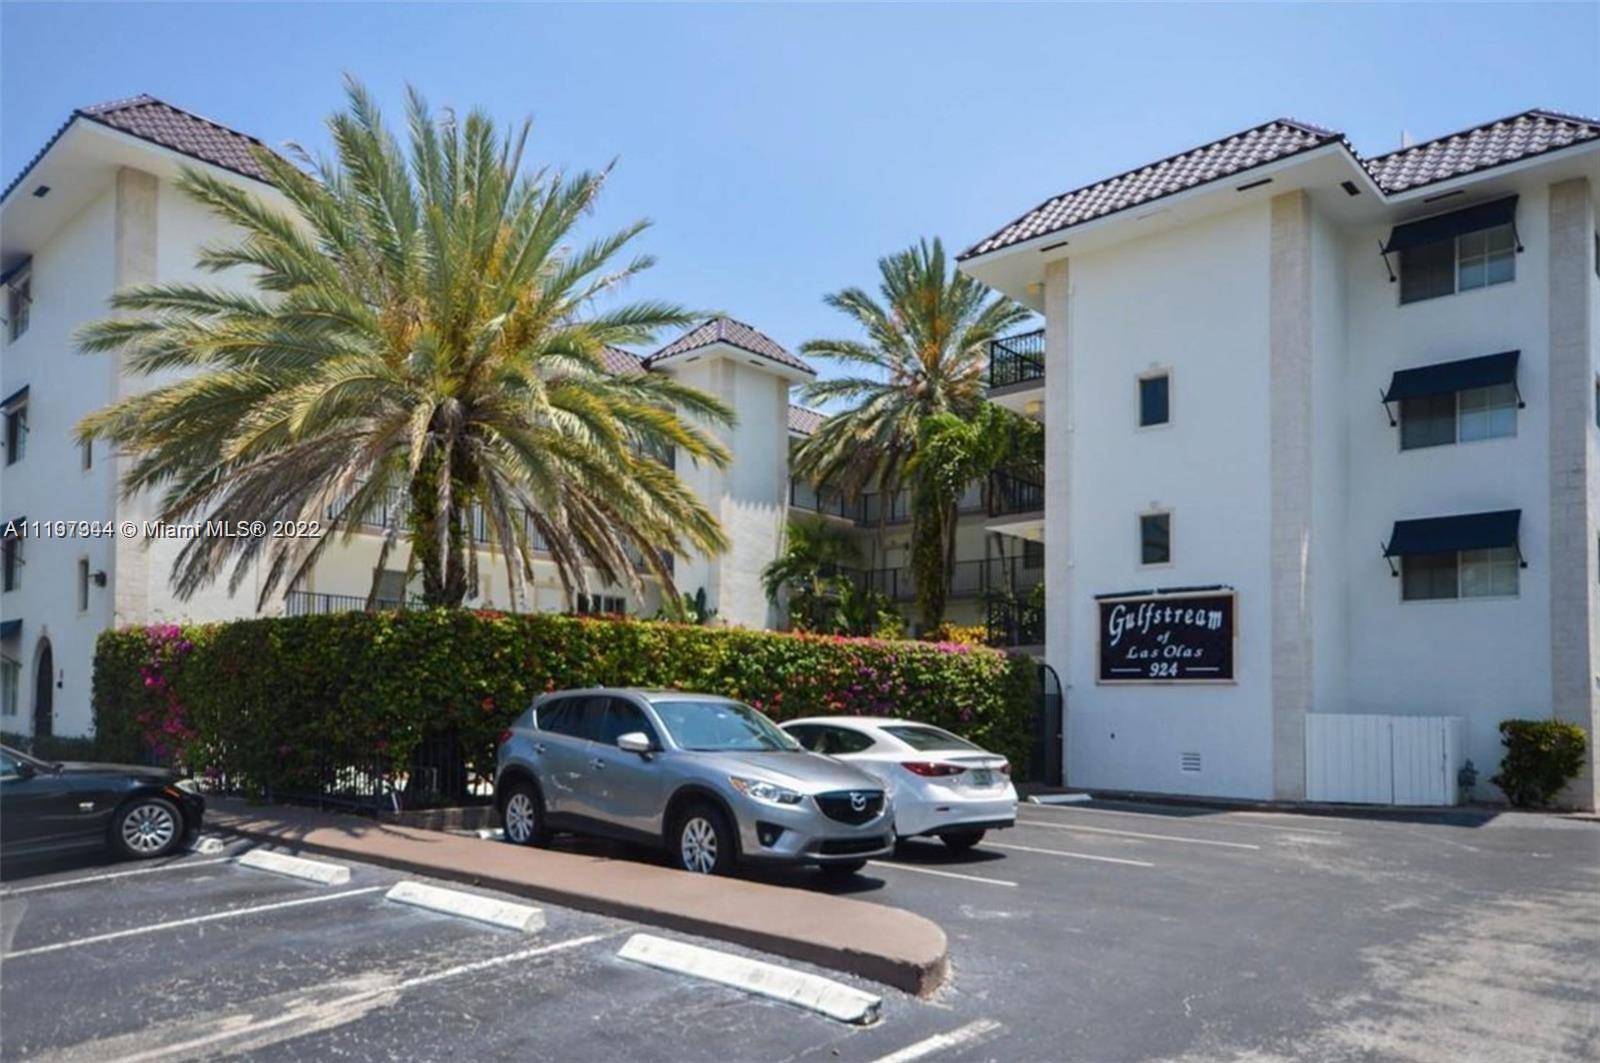 Gorgeous first floor corner unit located 2 blocks from Las Olas -  Unit is a split floor-plan with a